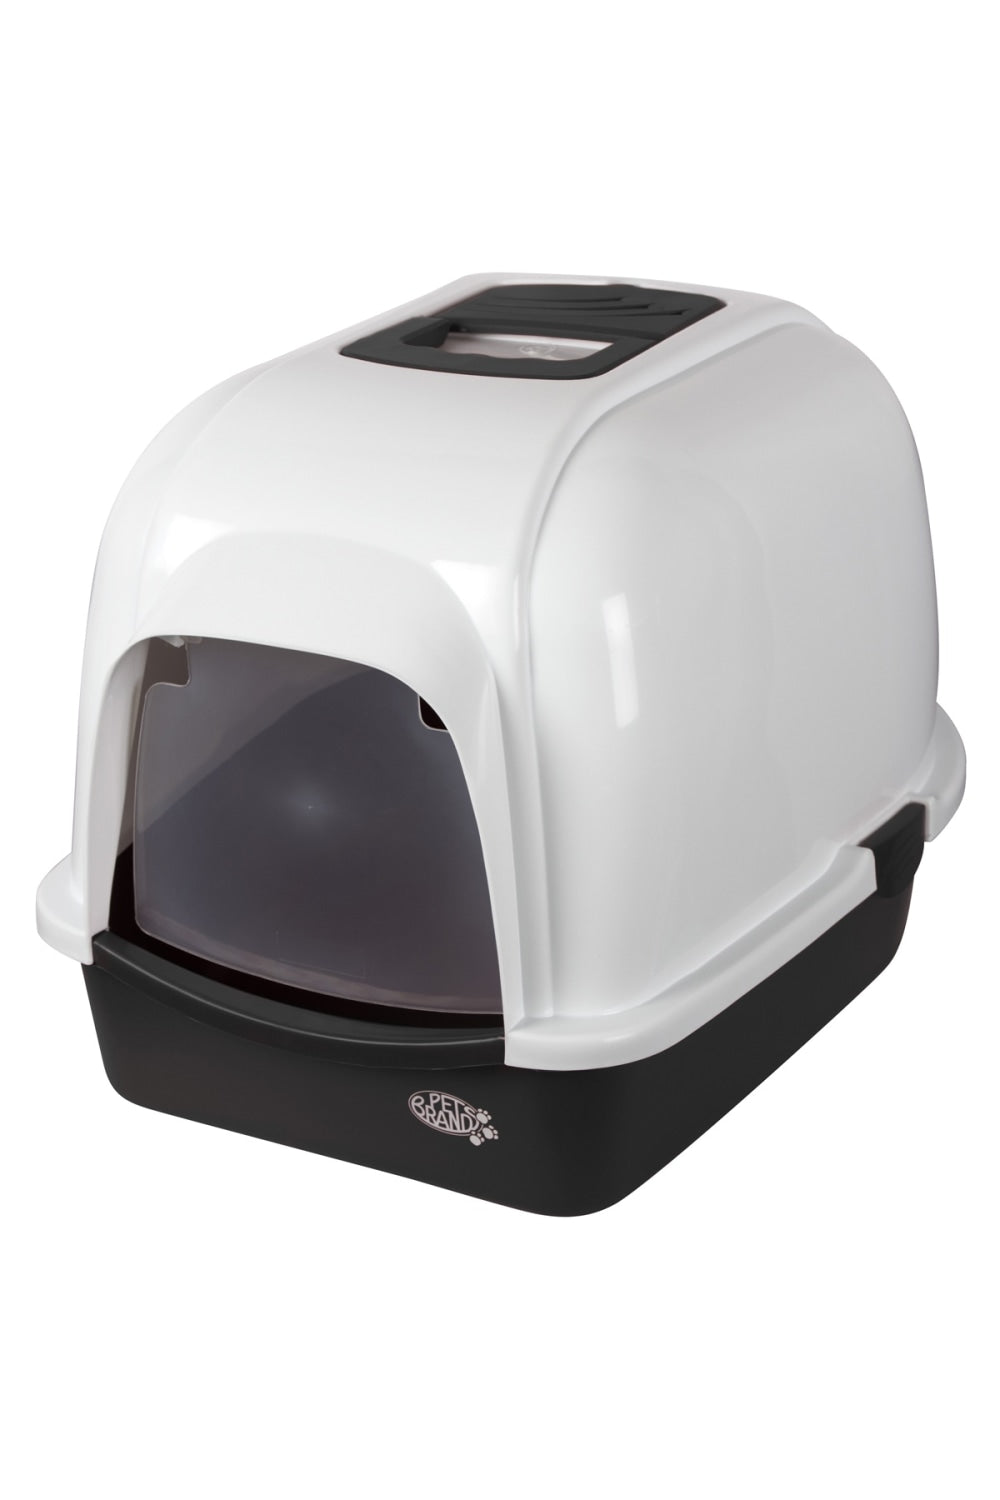 Pet Brands Oval Cat Litter Tray With Hood